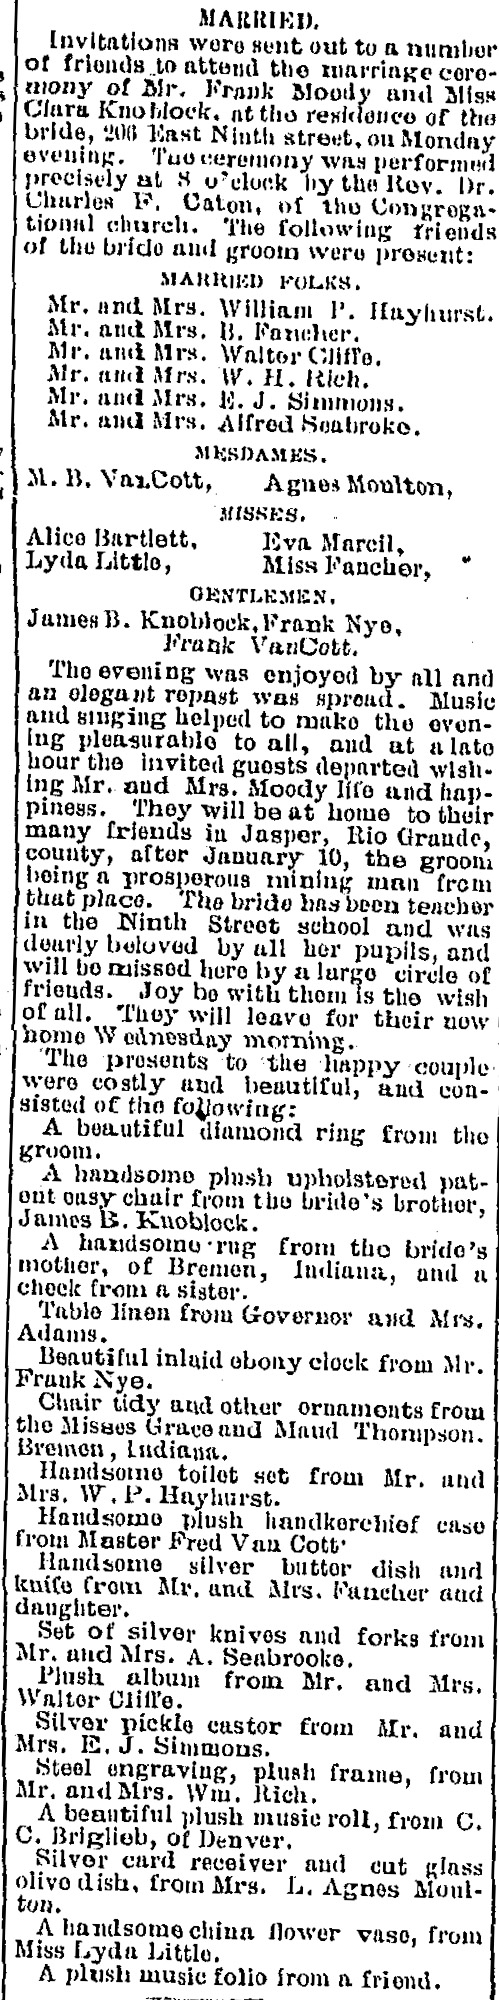 Dauth Family Archive - 1887-12-27 - Herald Democrat - Elisabeth Dauth And Walter Cliffe Attend Marriage Celebration